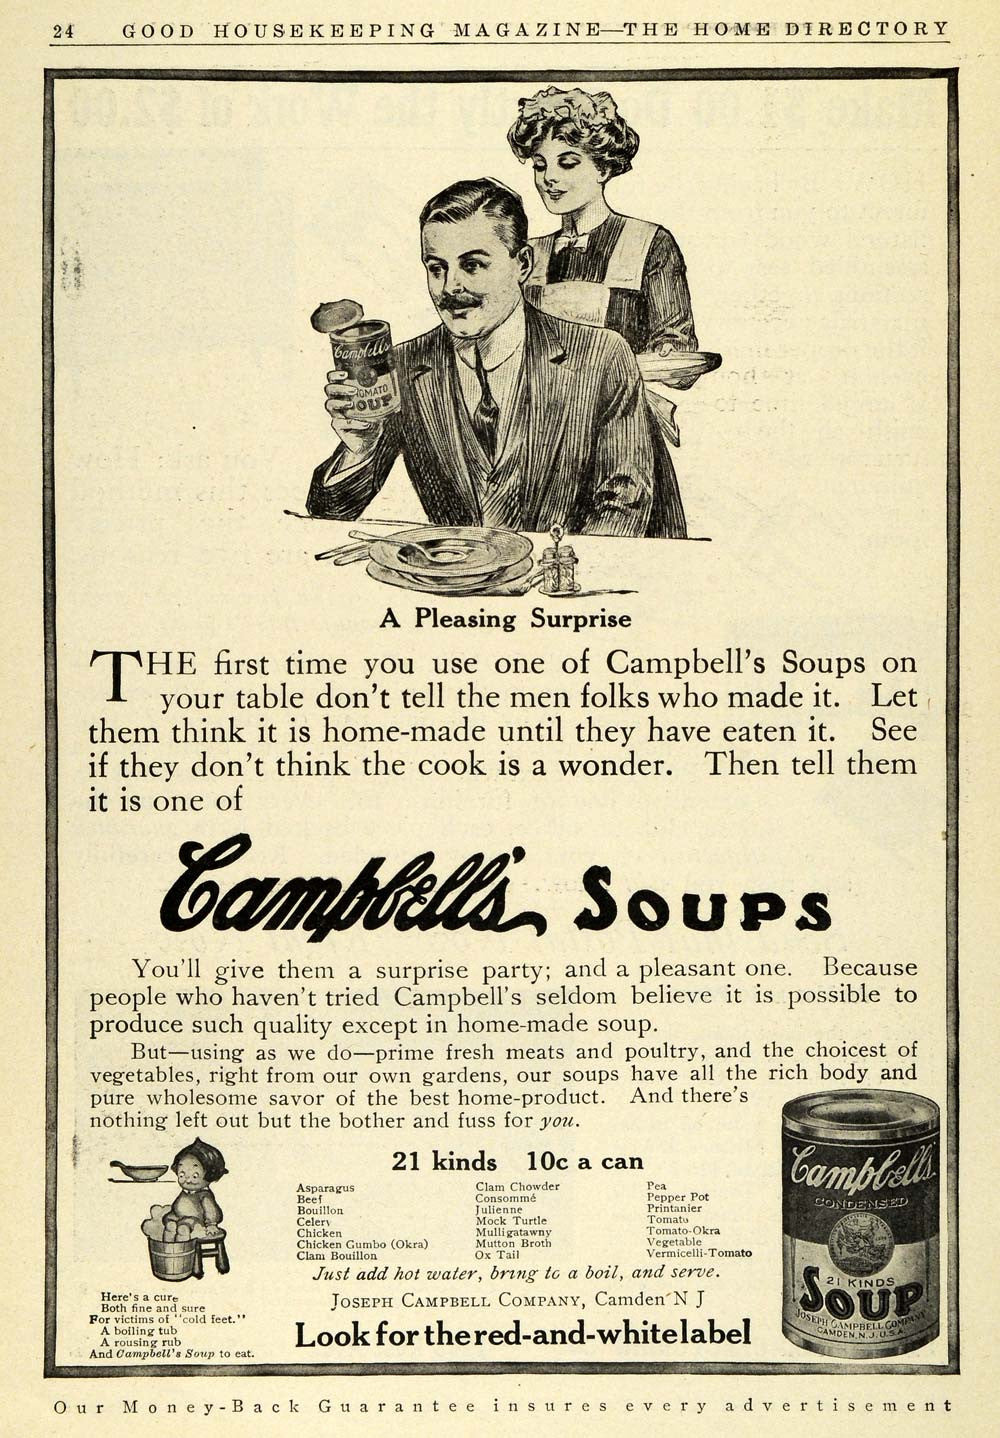 1911 Ad Campbells Souper Kid Soups Varieties White Red Label Housekeeper GH4